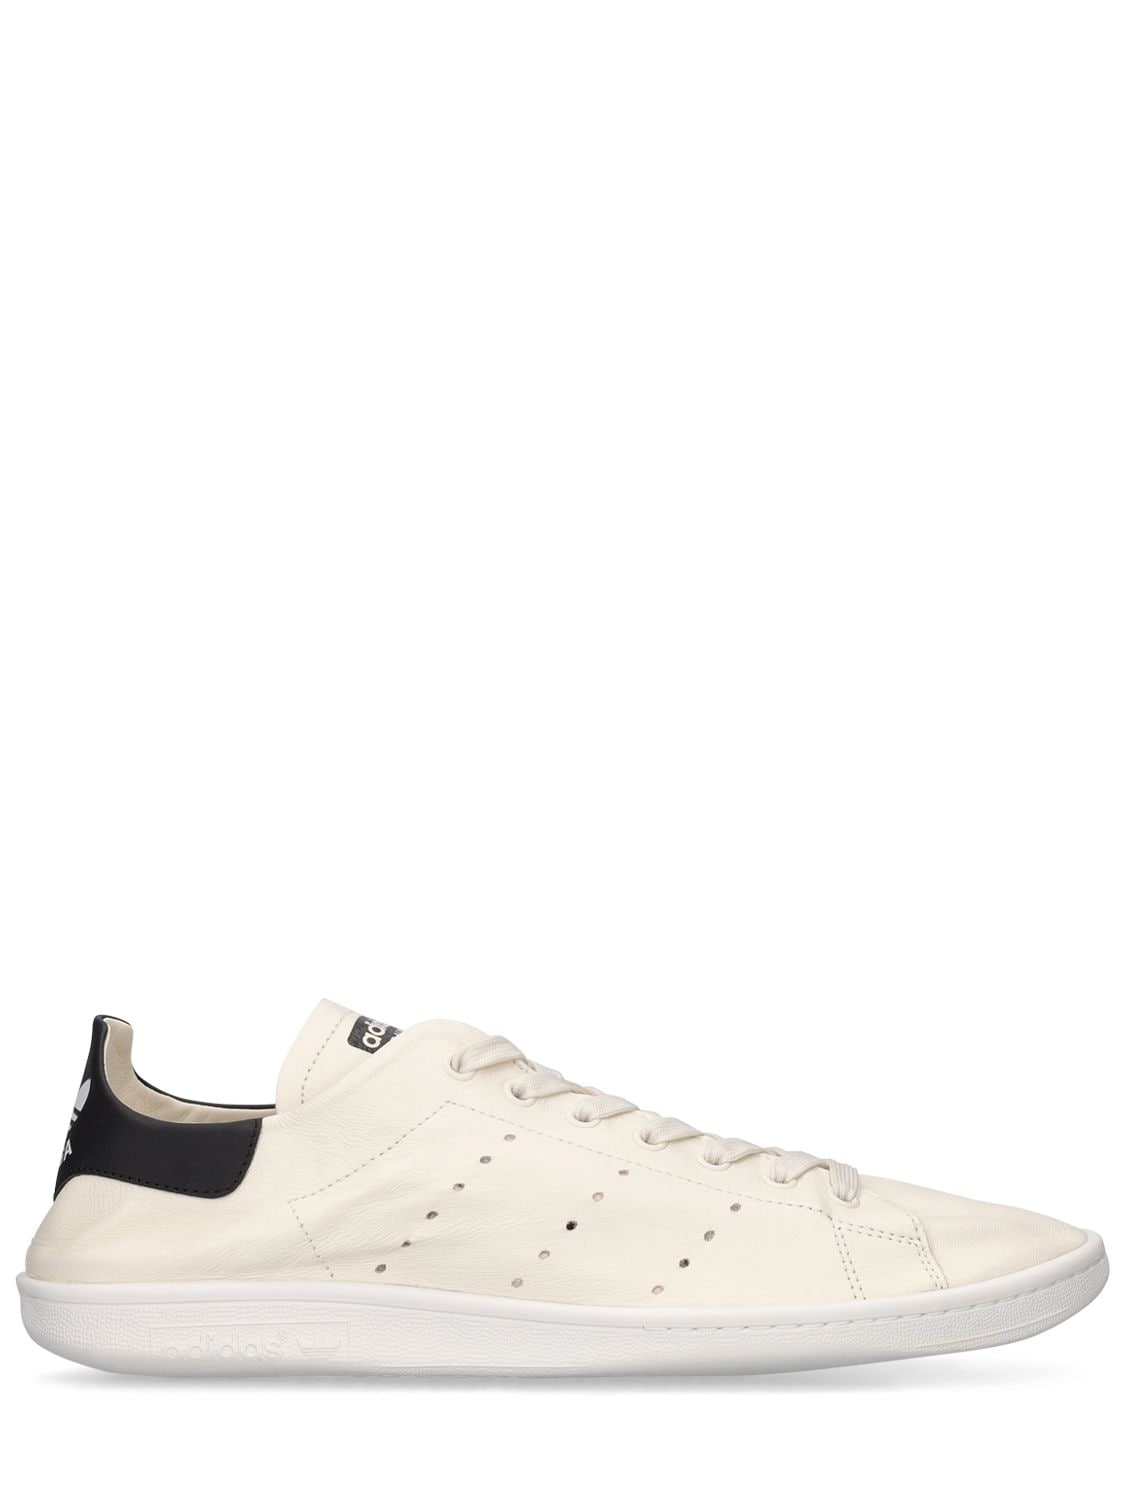 Image of Adidas Stan Smith Sneakers